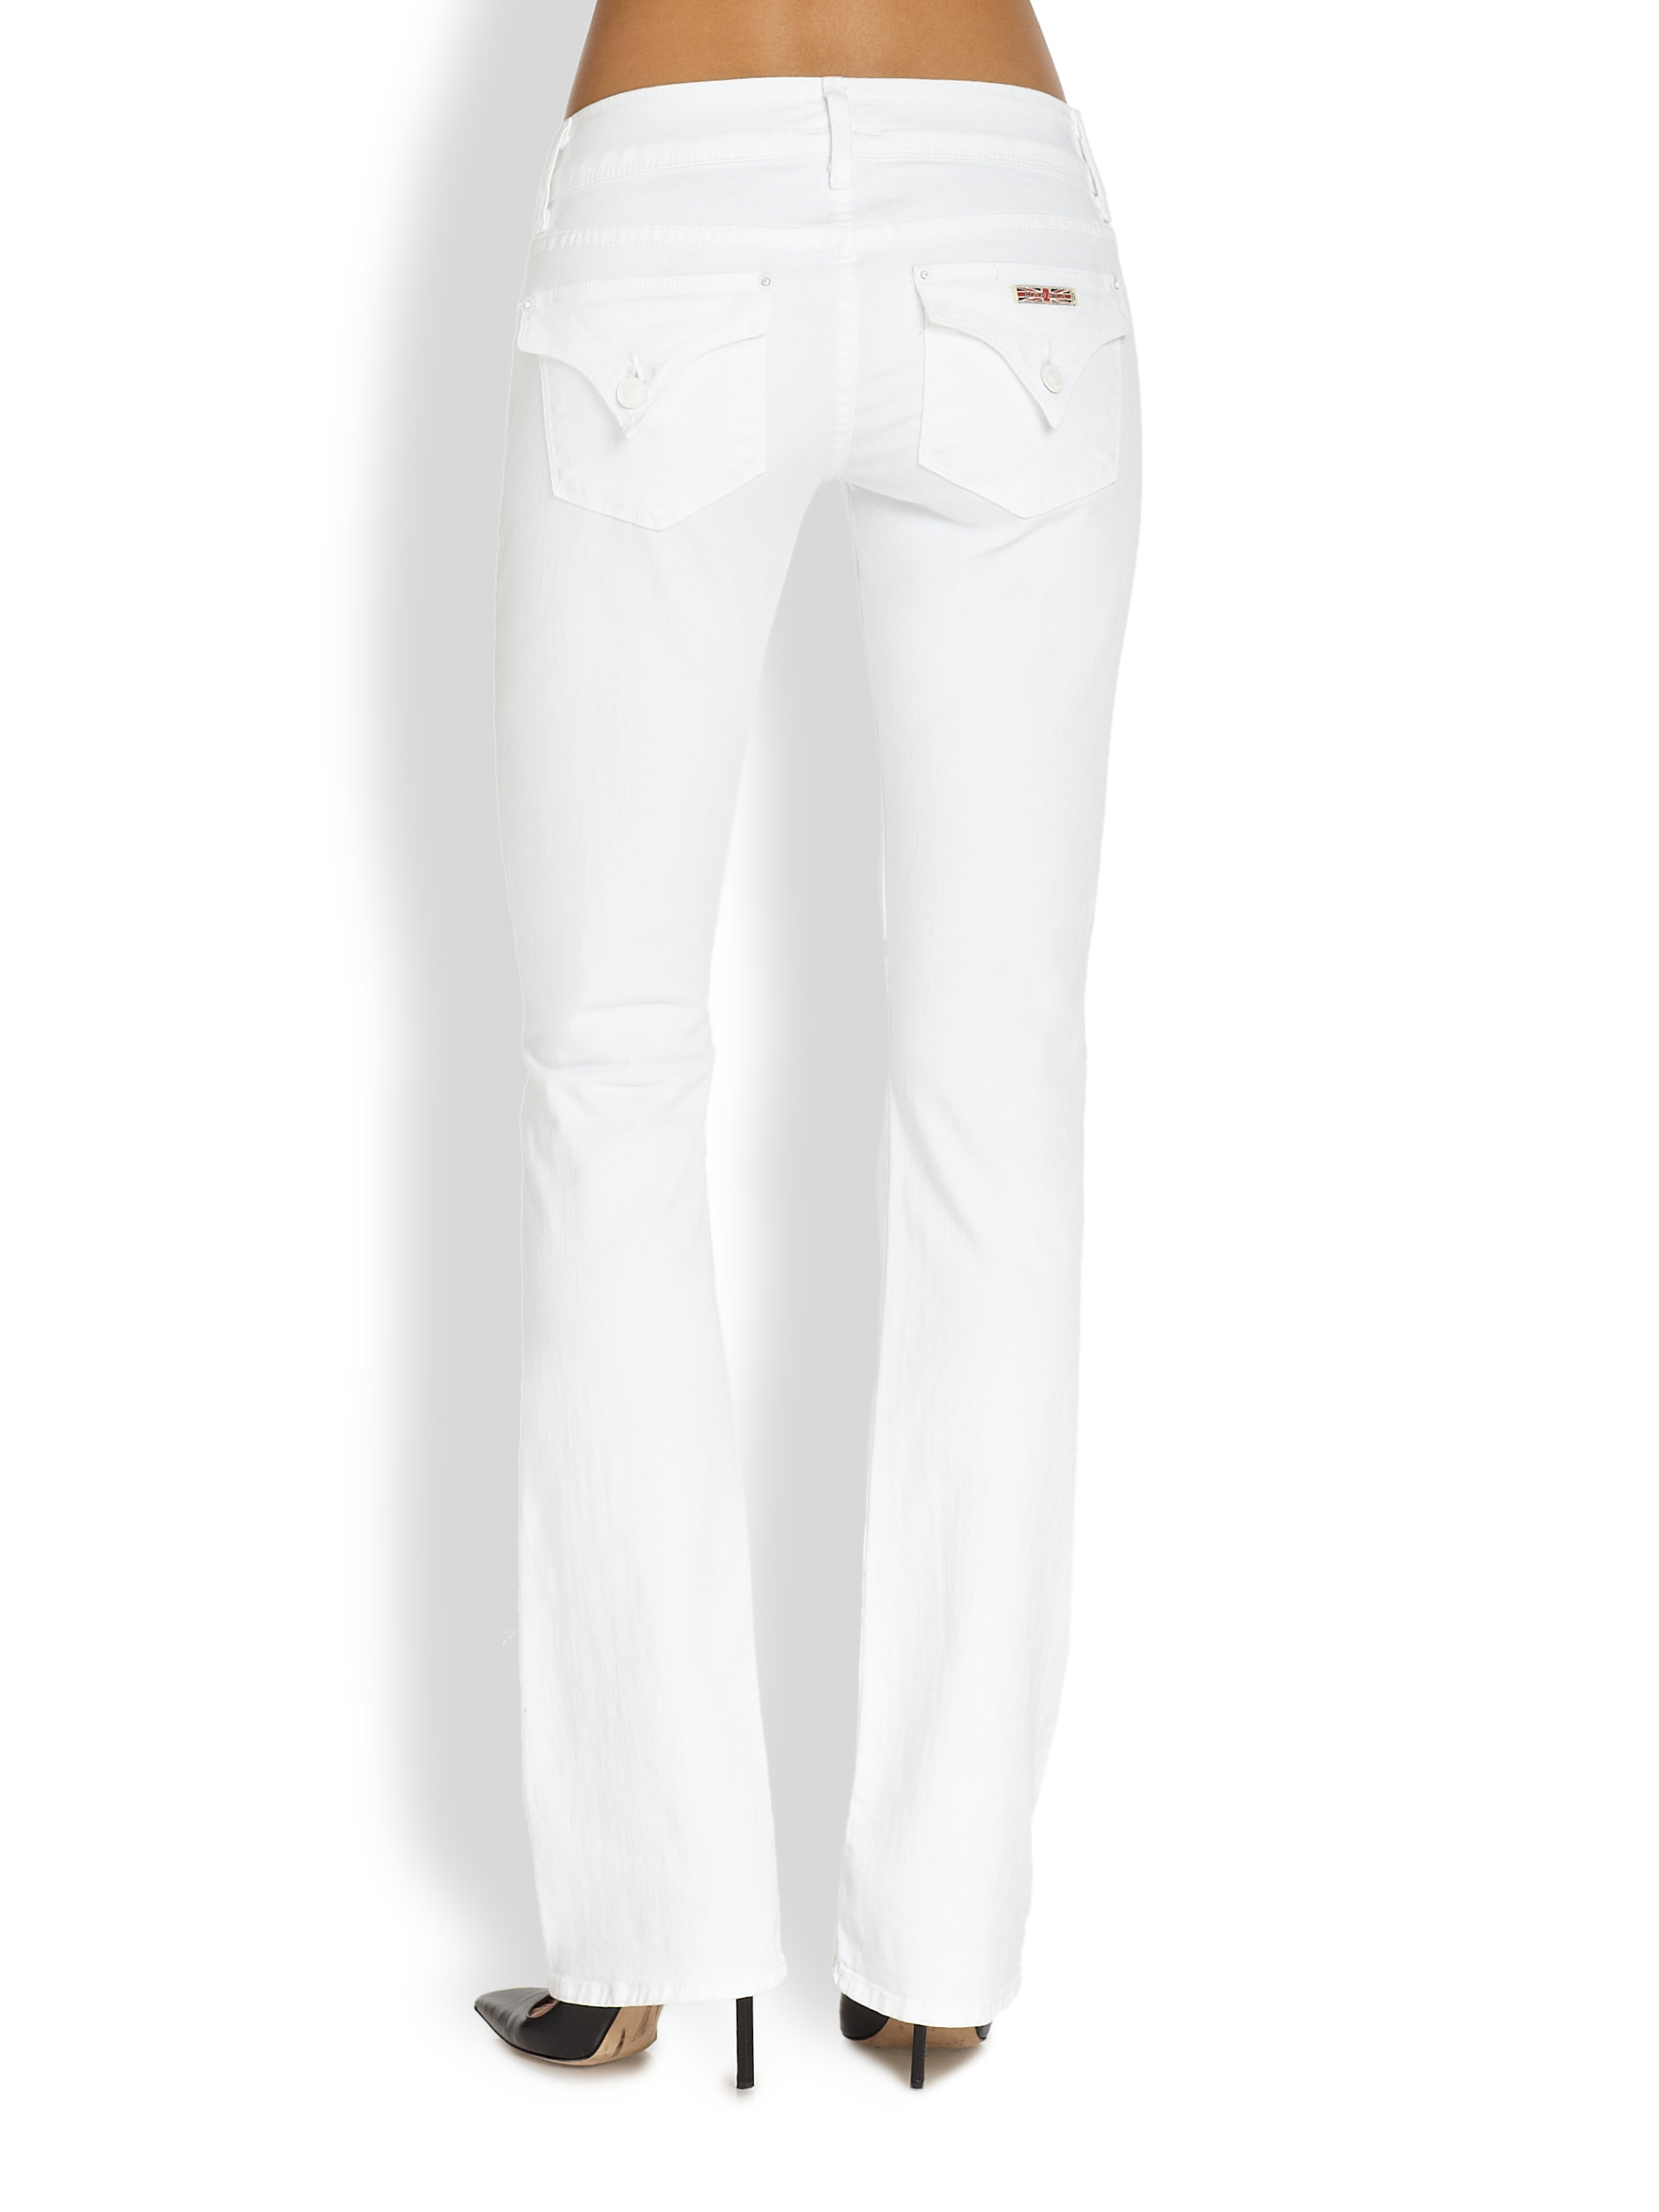 Womens white jeans bootcut